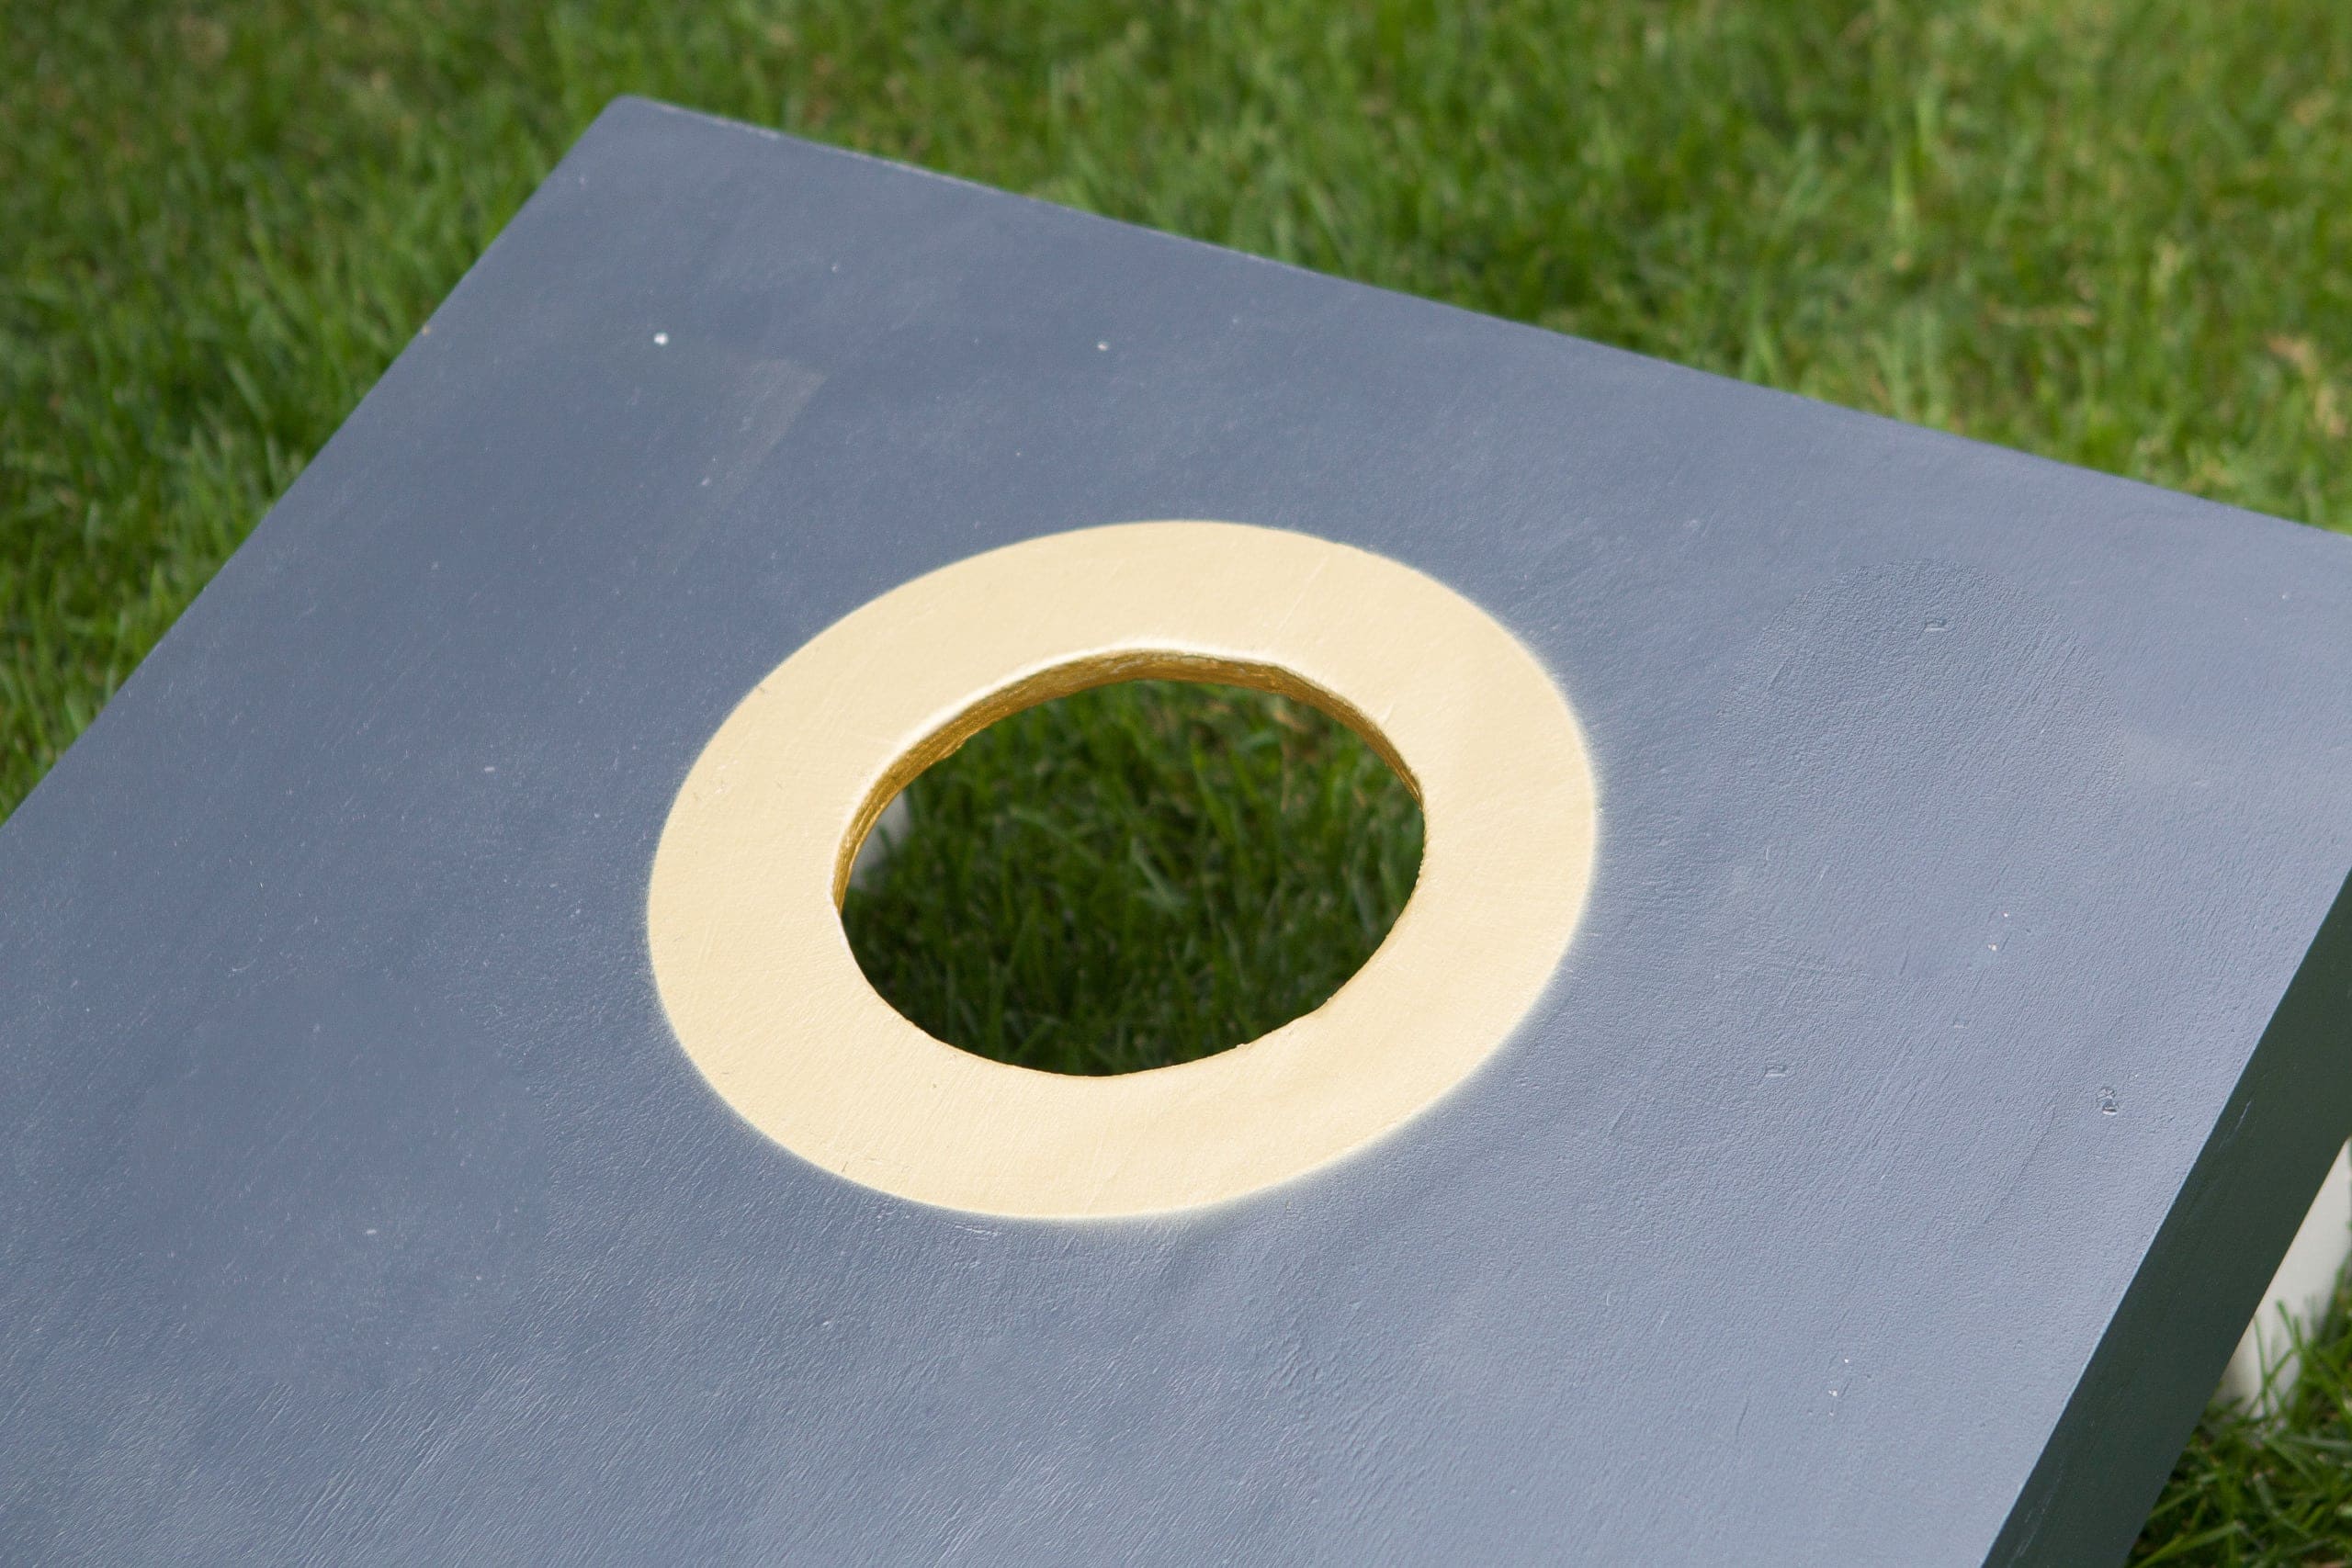 How to make gold center around hole in cornhole